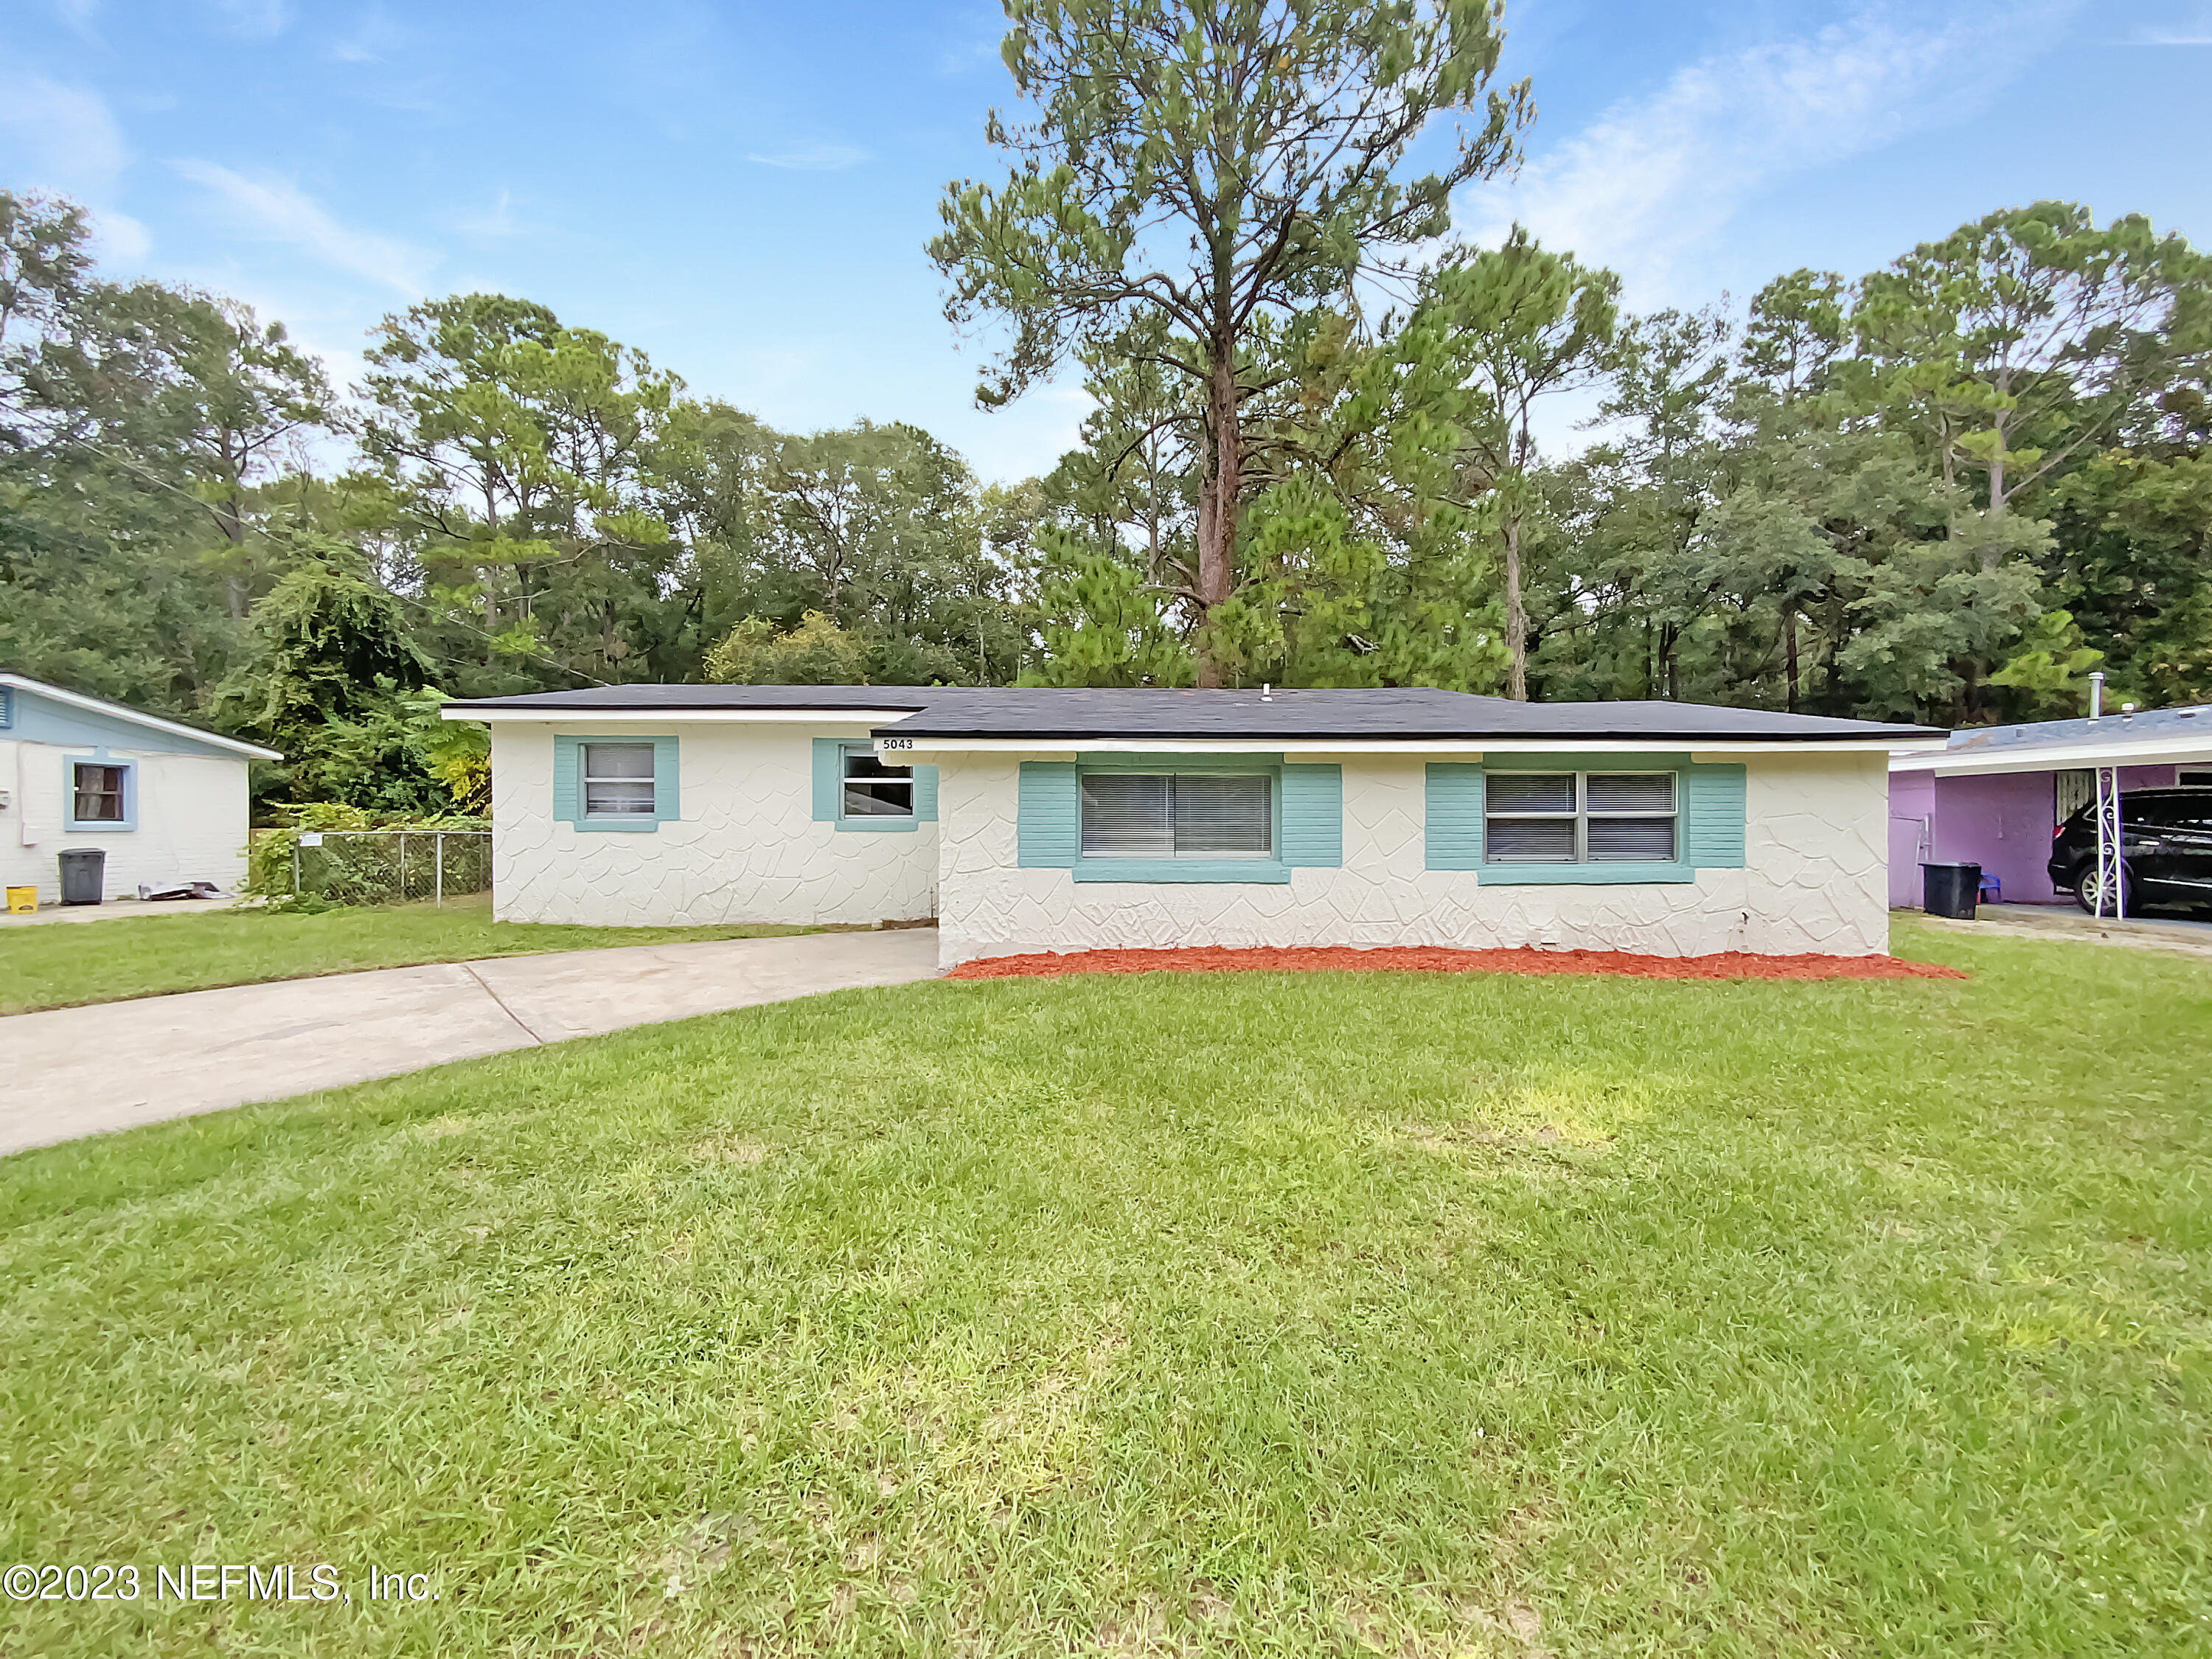 Jacksonville, FL home for sale located at 5043 Arrowsmith Road, Jacksonville, FL 32208